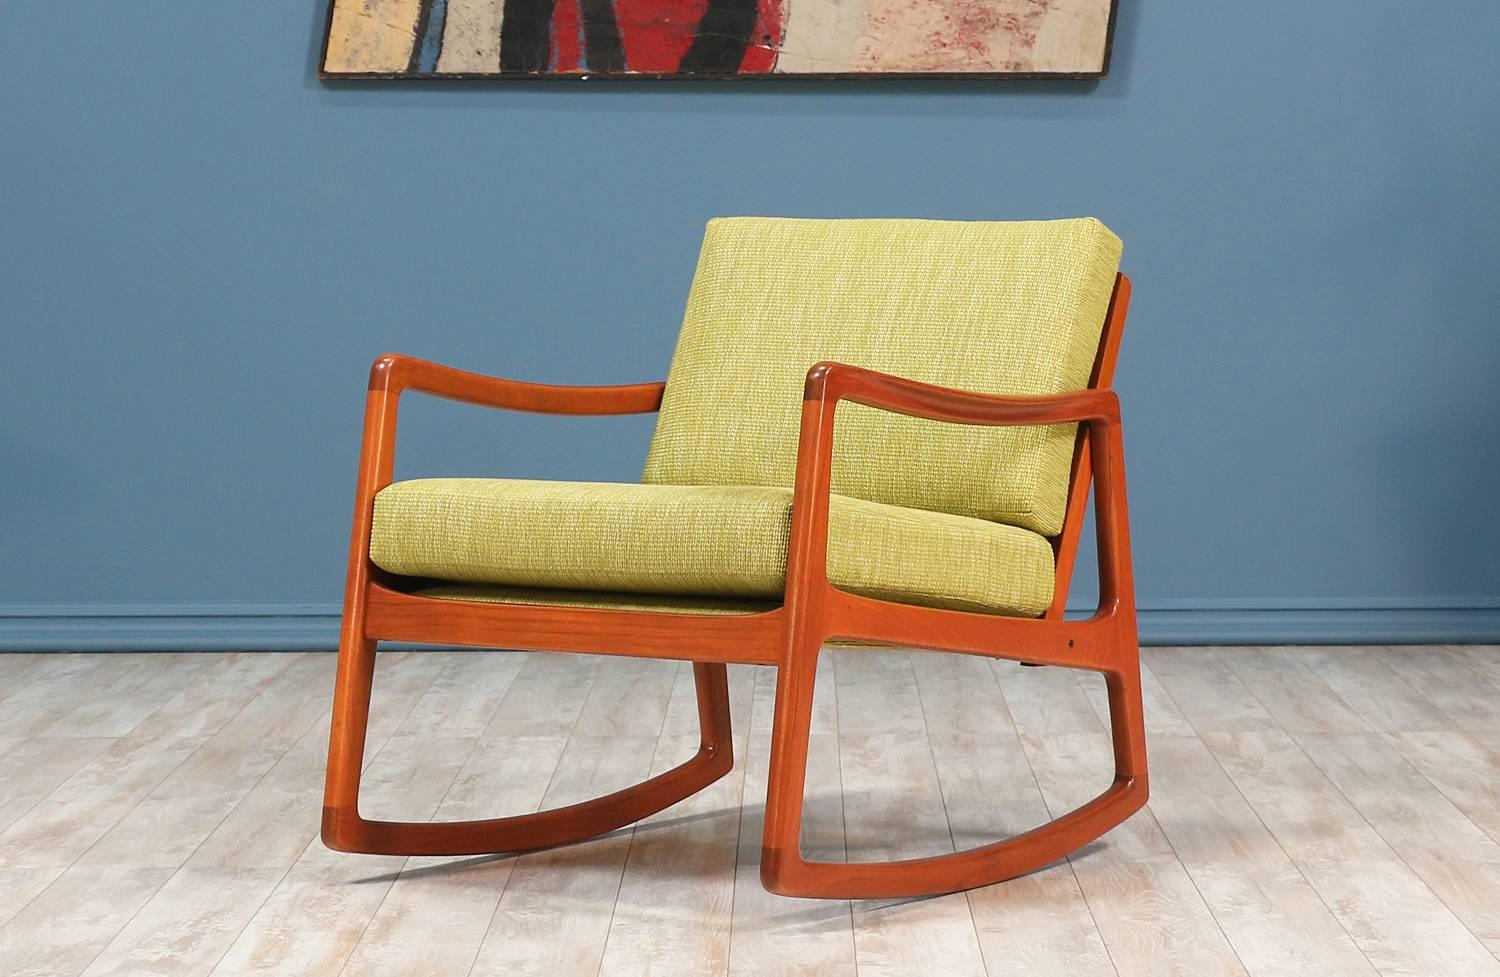 Rocking Chair designed by Ole Wanscher for France & Søn in Denmark circa 1950’s. This beautiful Danish modern design features a solid teakwood frame that maintains the manufacturer label on the back. Features comfortable curvilinear arm rests and a